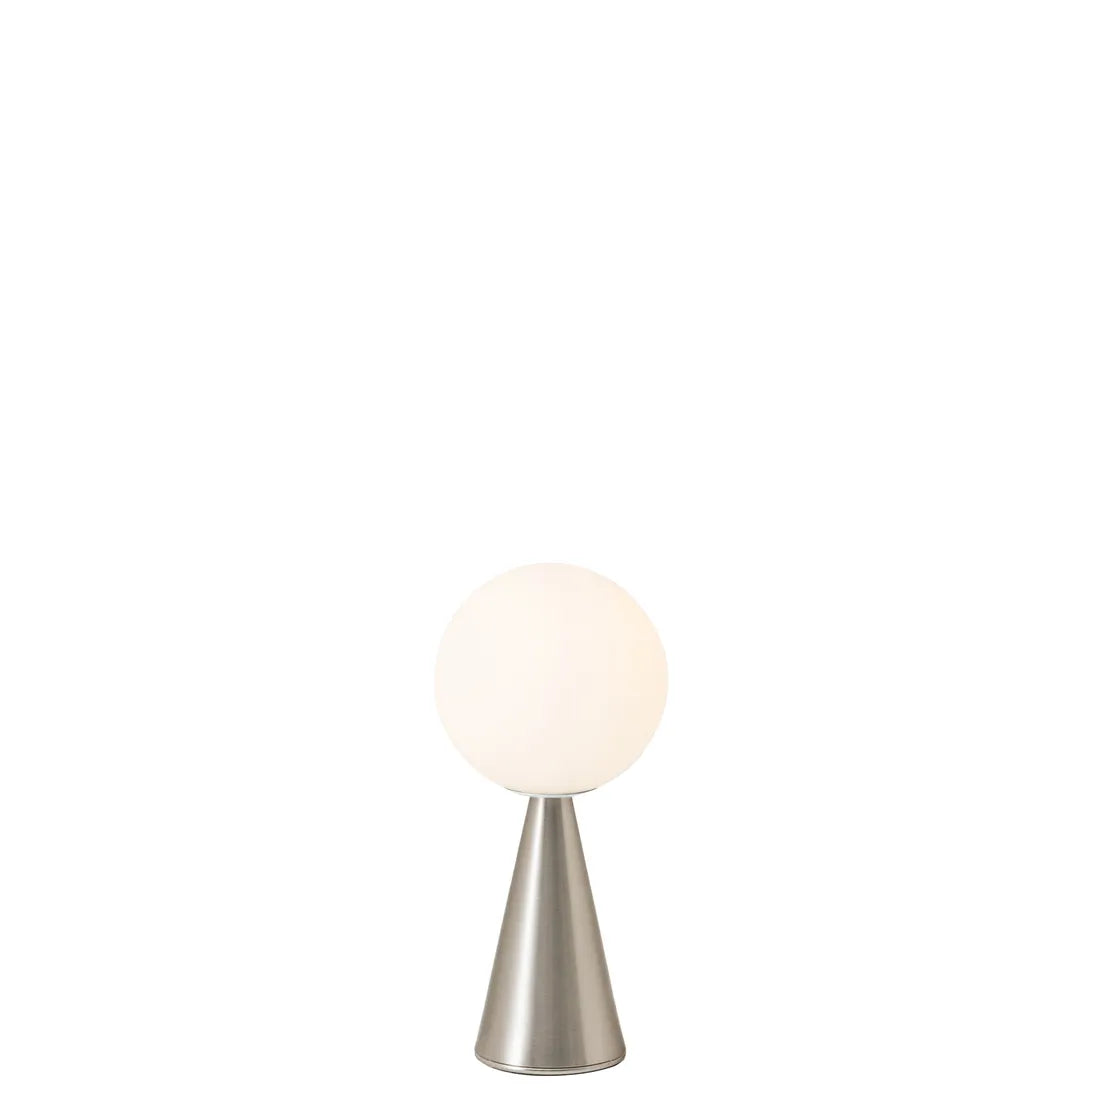 designer table lamps online, table lamps india, new mini lamps for dining table grey